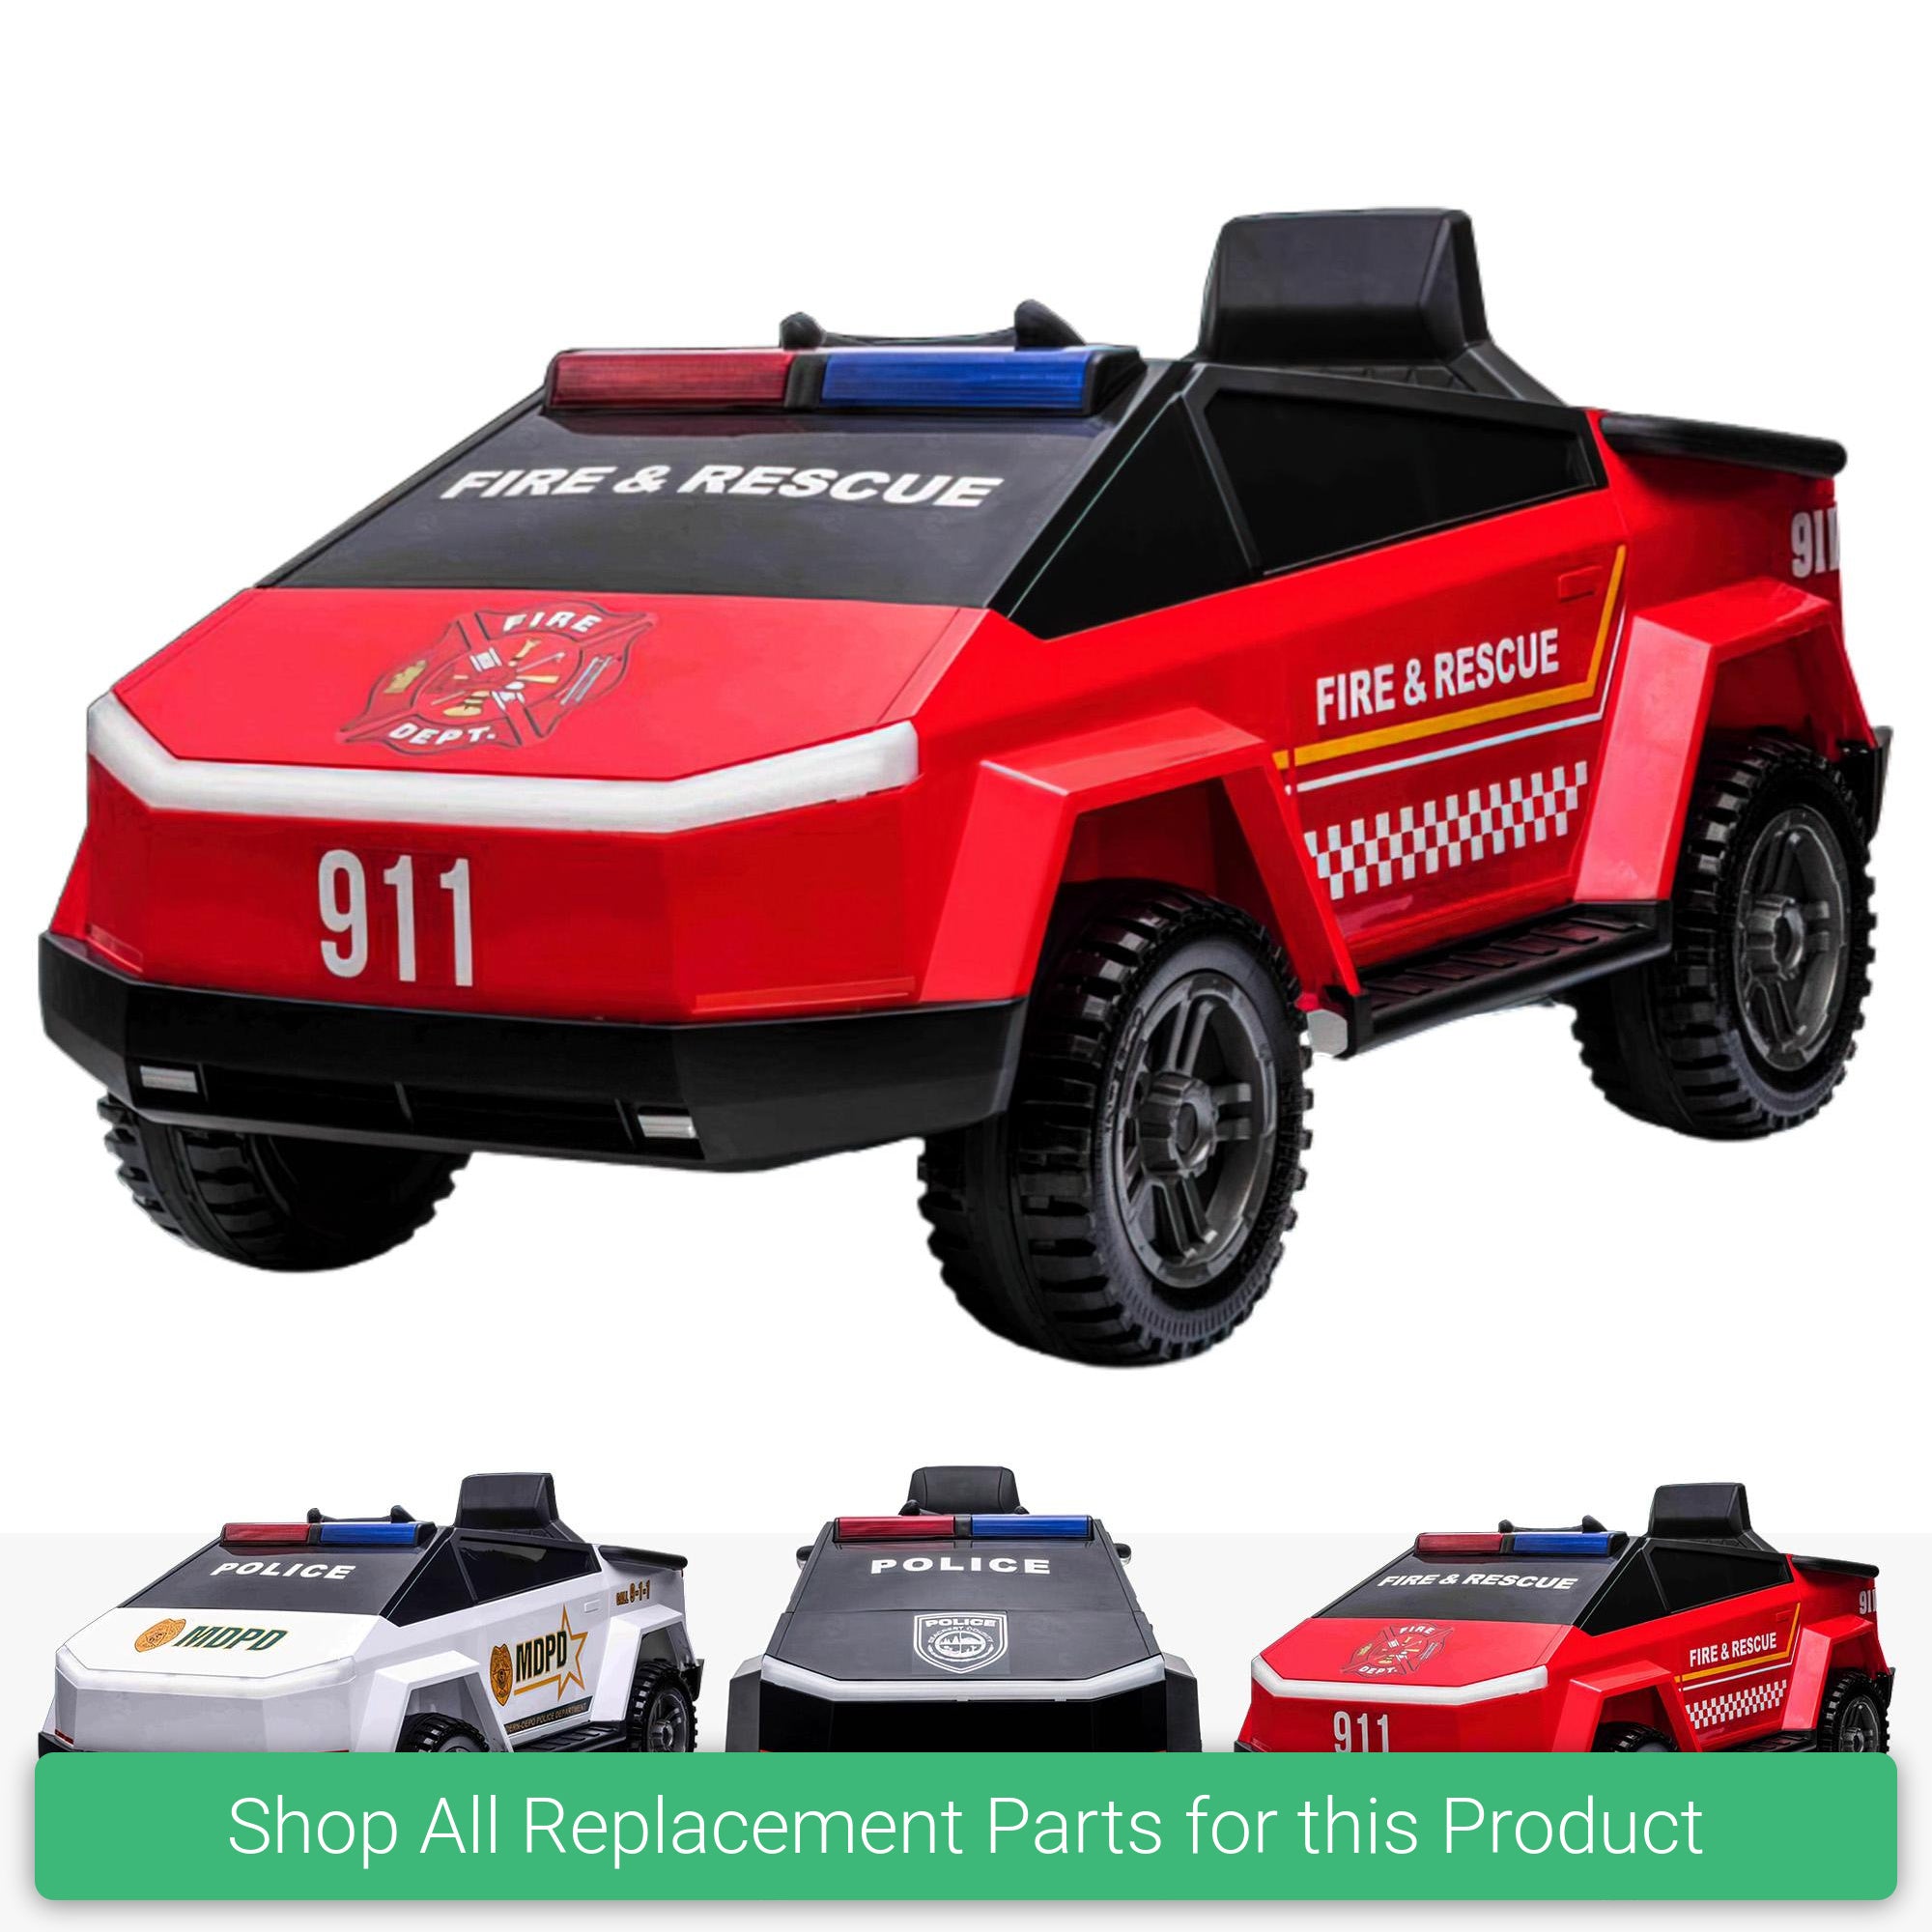 Replacement Parts and Spares for Kids CyberPunk First Response Vehicle - TSL-POL-VARI - BRD-2102